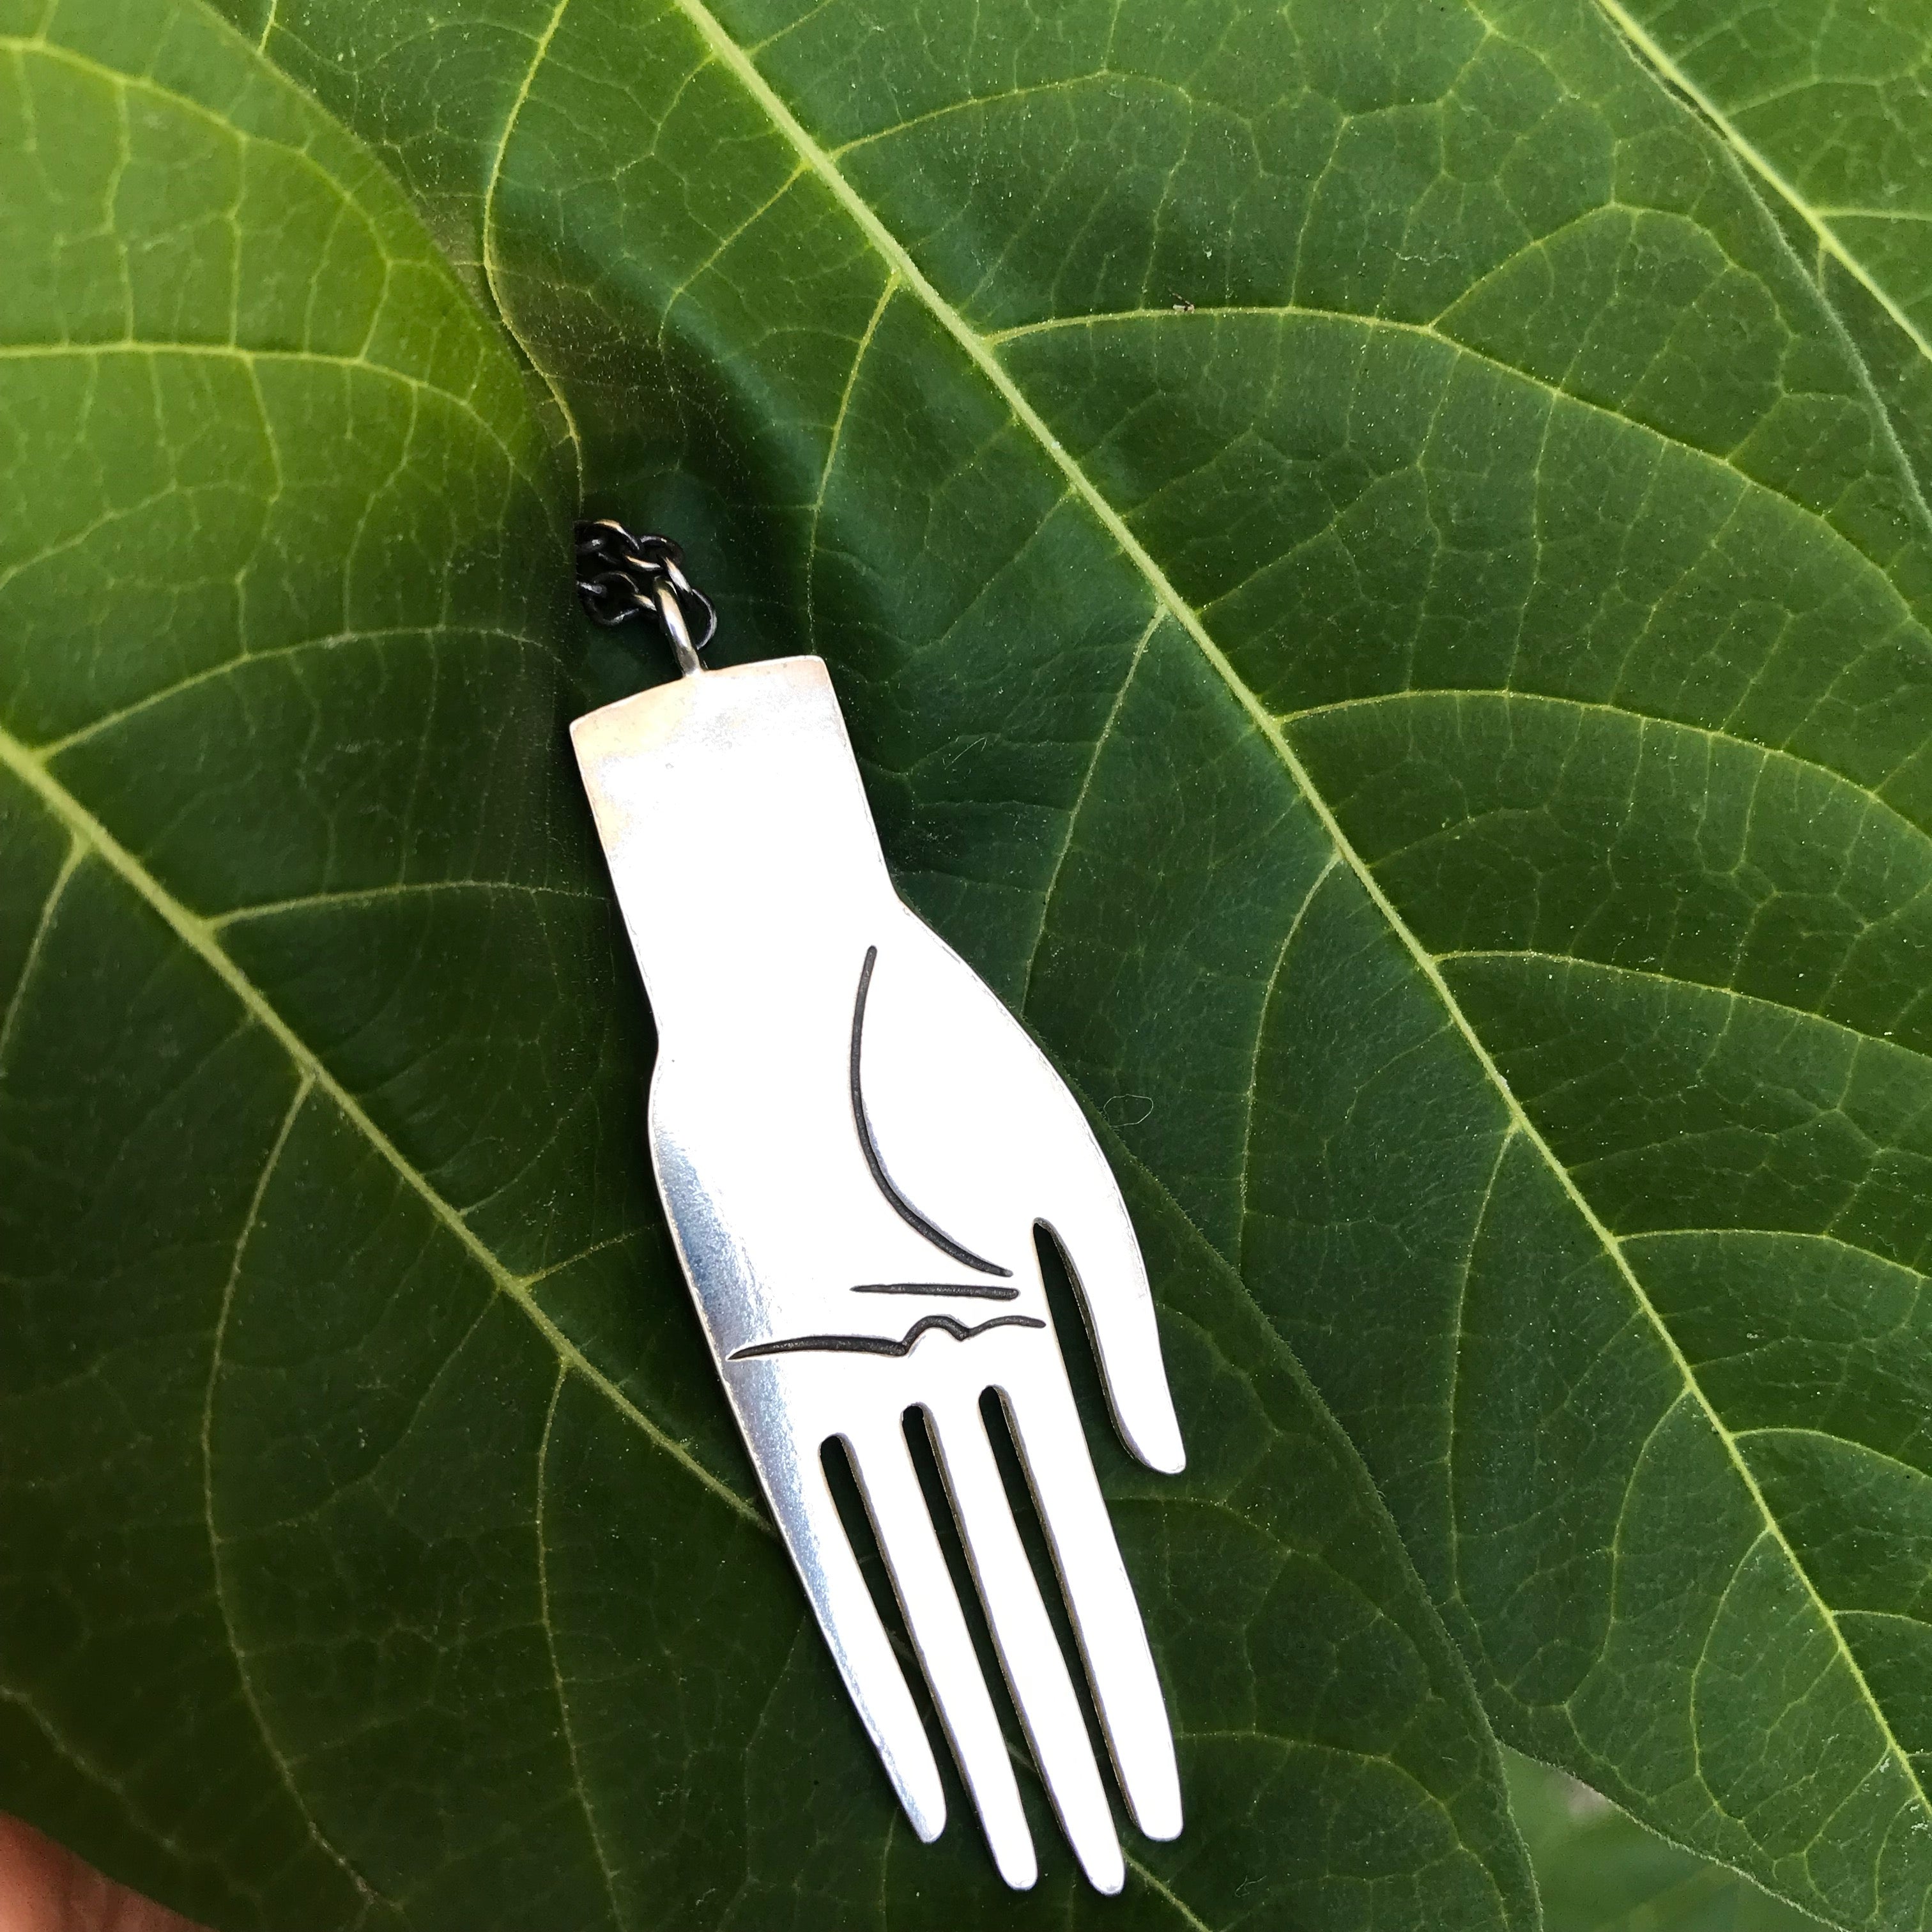 Banquet Atelier & Workshop Palmistry Hand Necklace / Sterling Silver